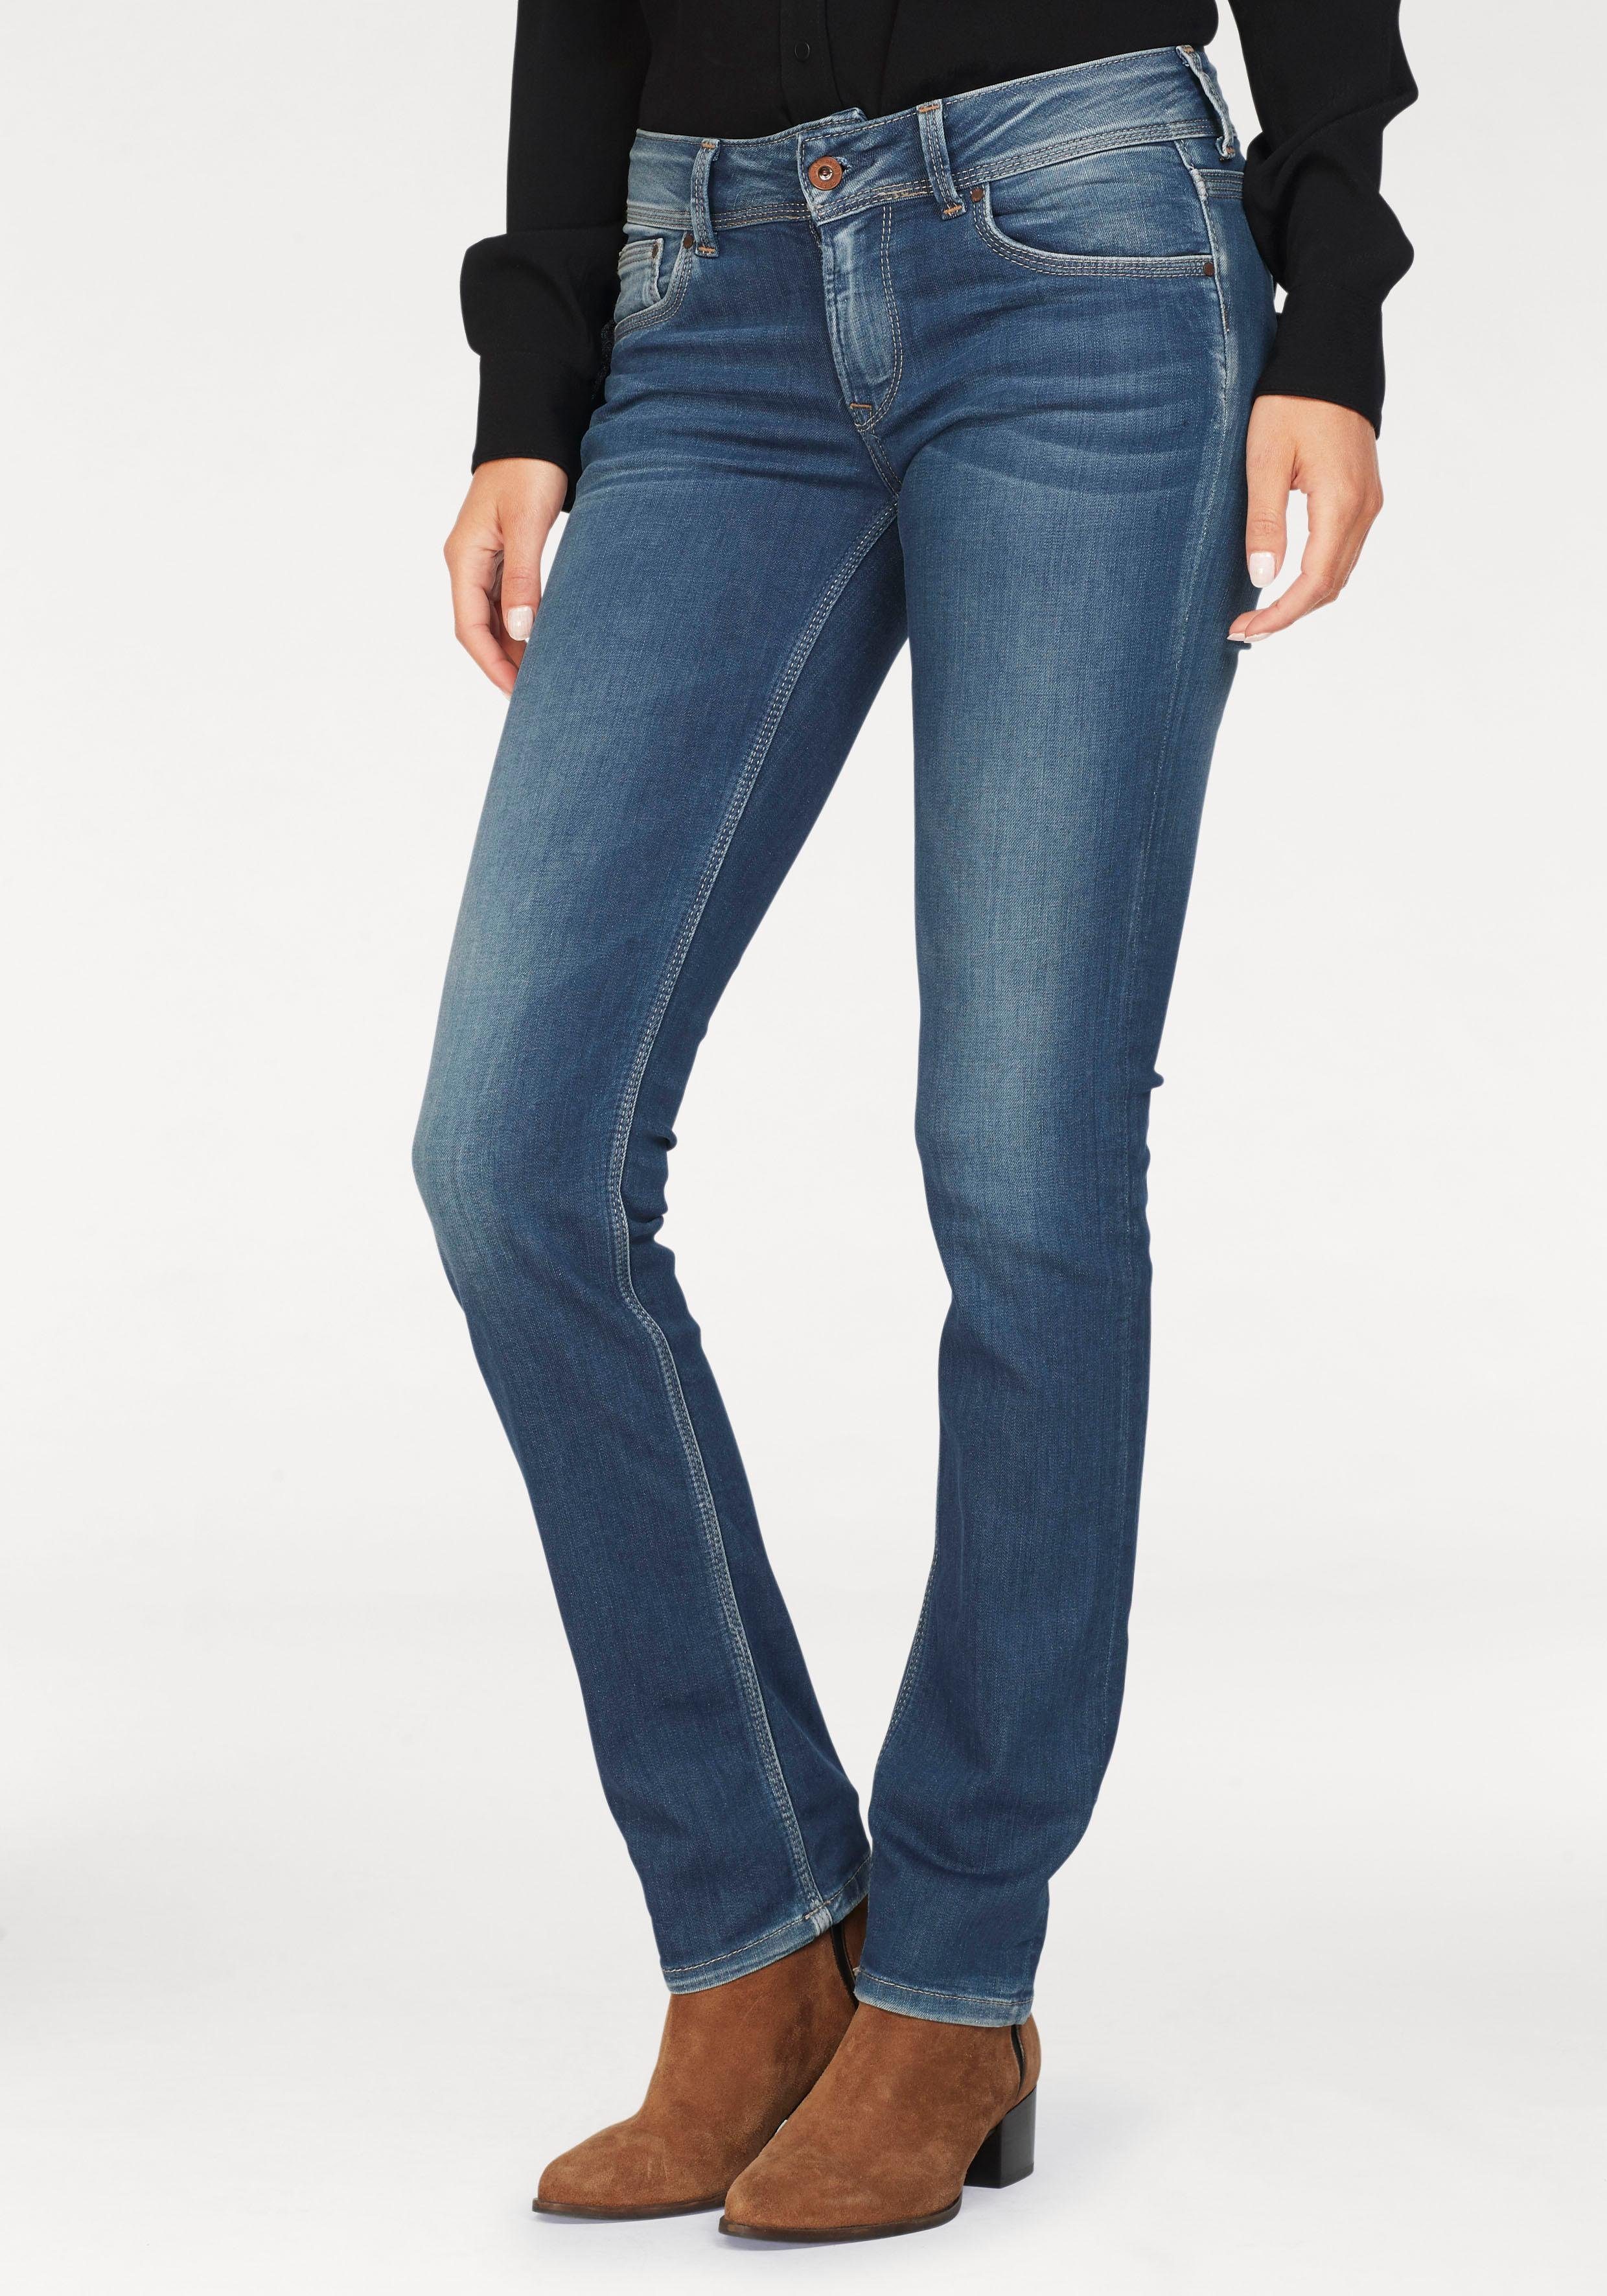 Otto - Pepe Jeans NU 15% KORTING: Pepe Jeans straight-jeans SATURN